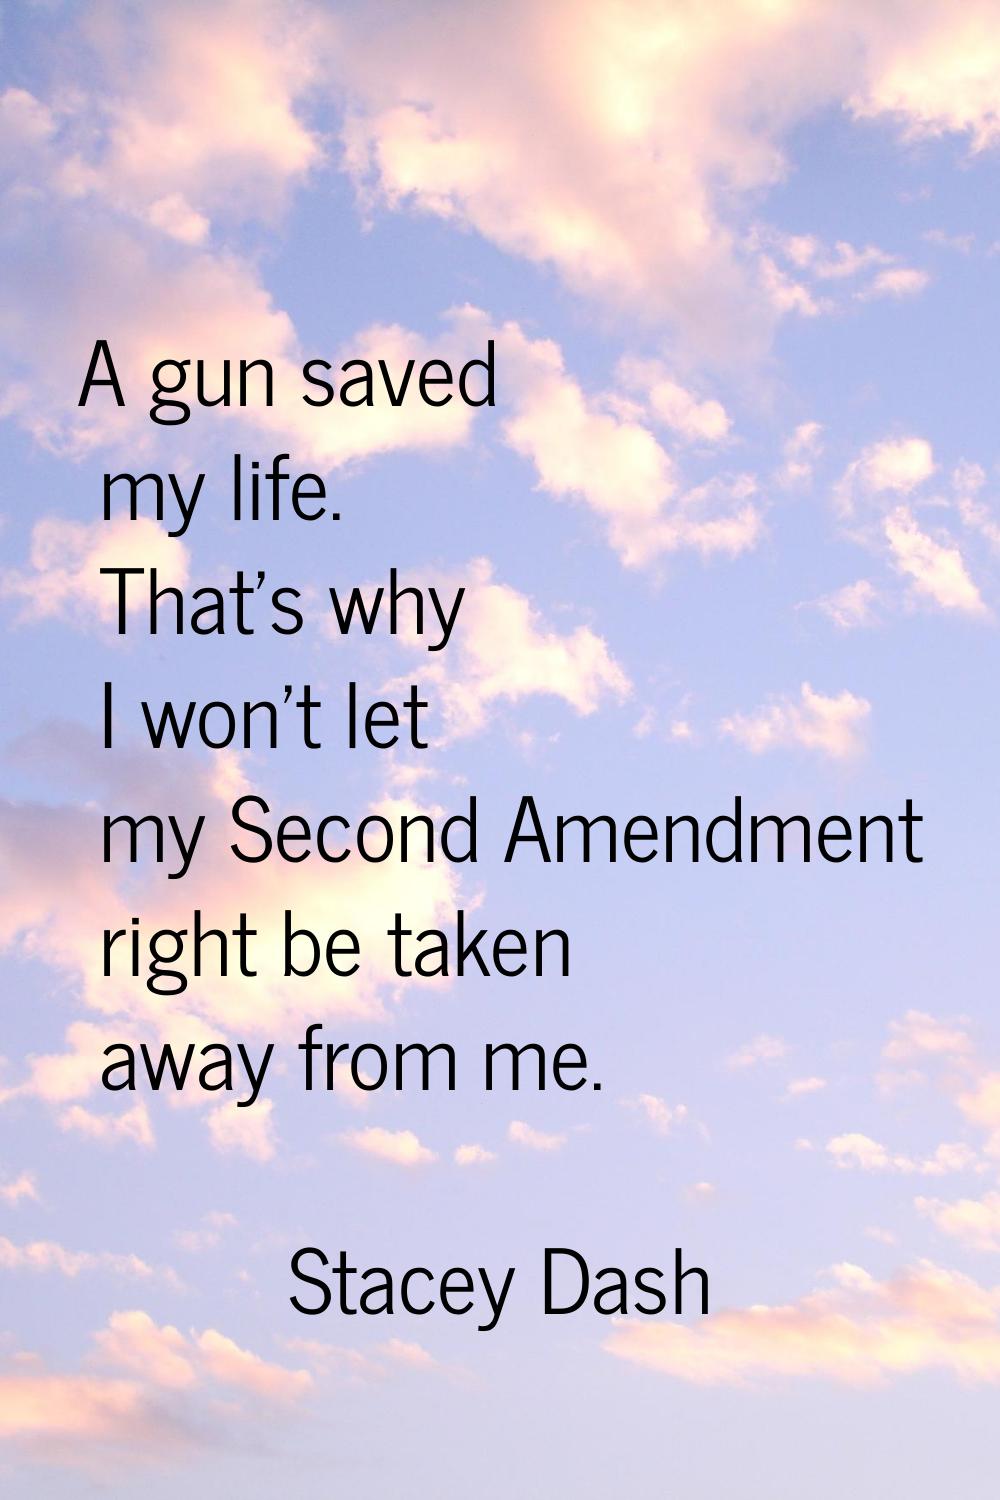 A gun saved my life. That's why I won't let my Second Amendment right be taken away from me.